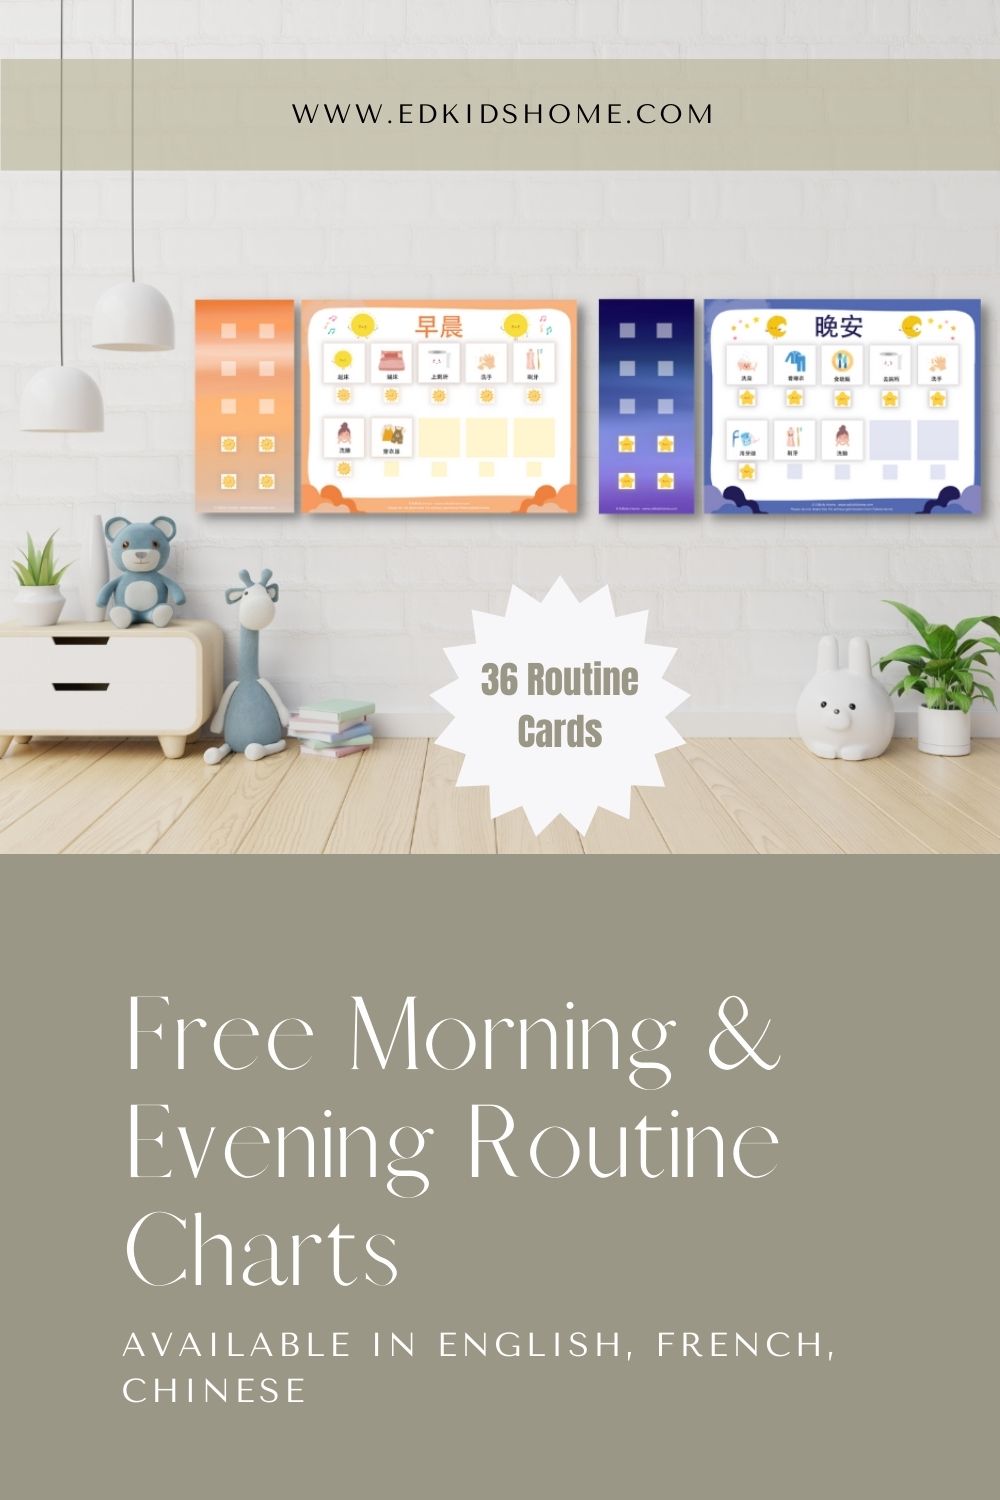 Free printable: Morning and evening routine charts. Available in English, French and Chinese